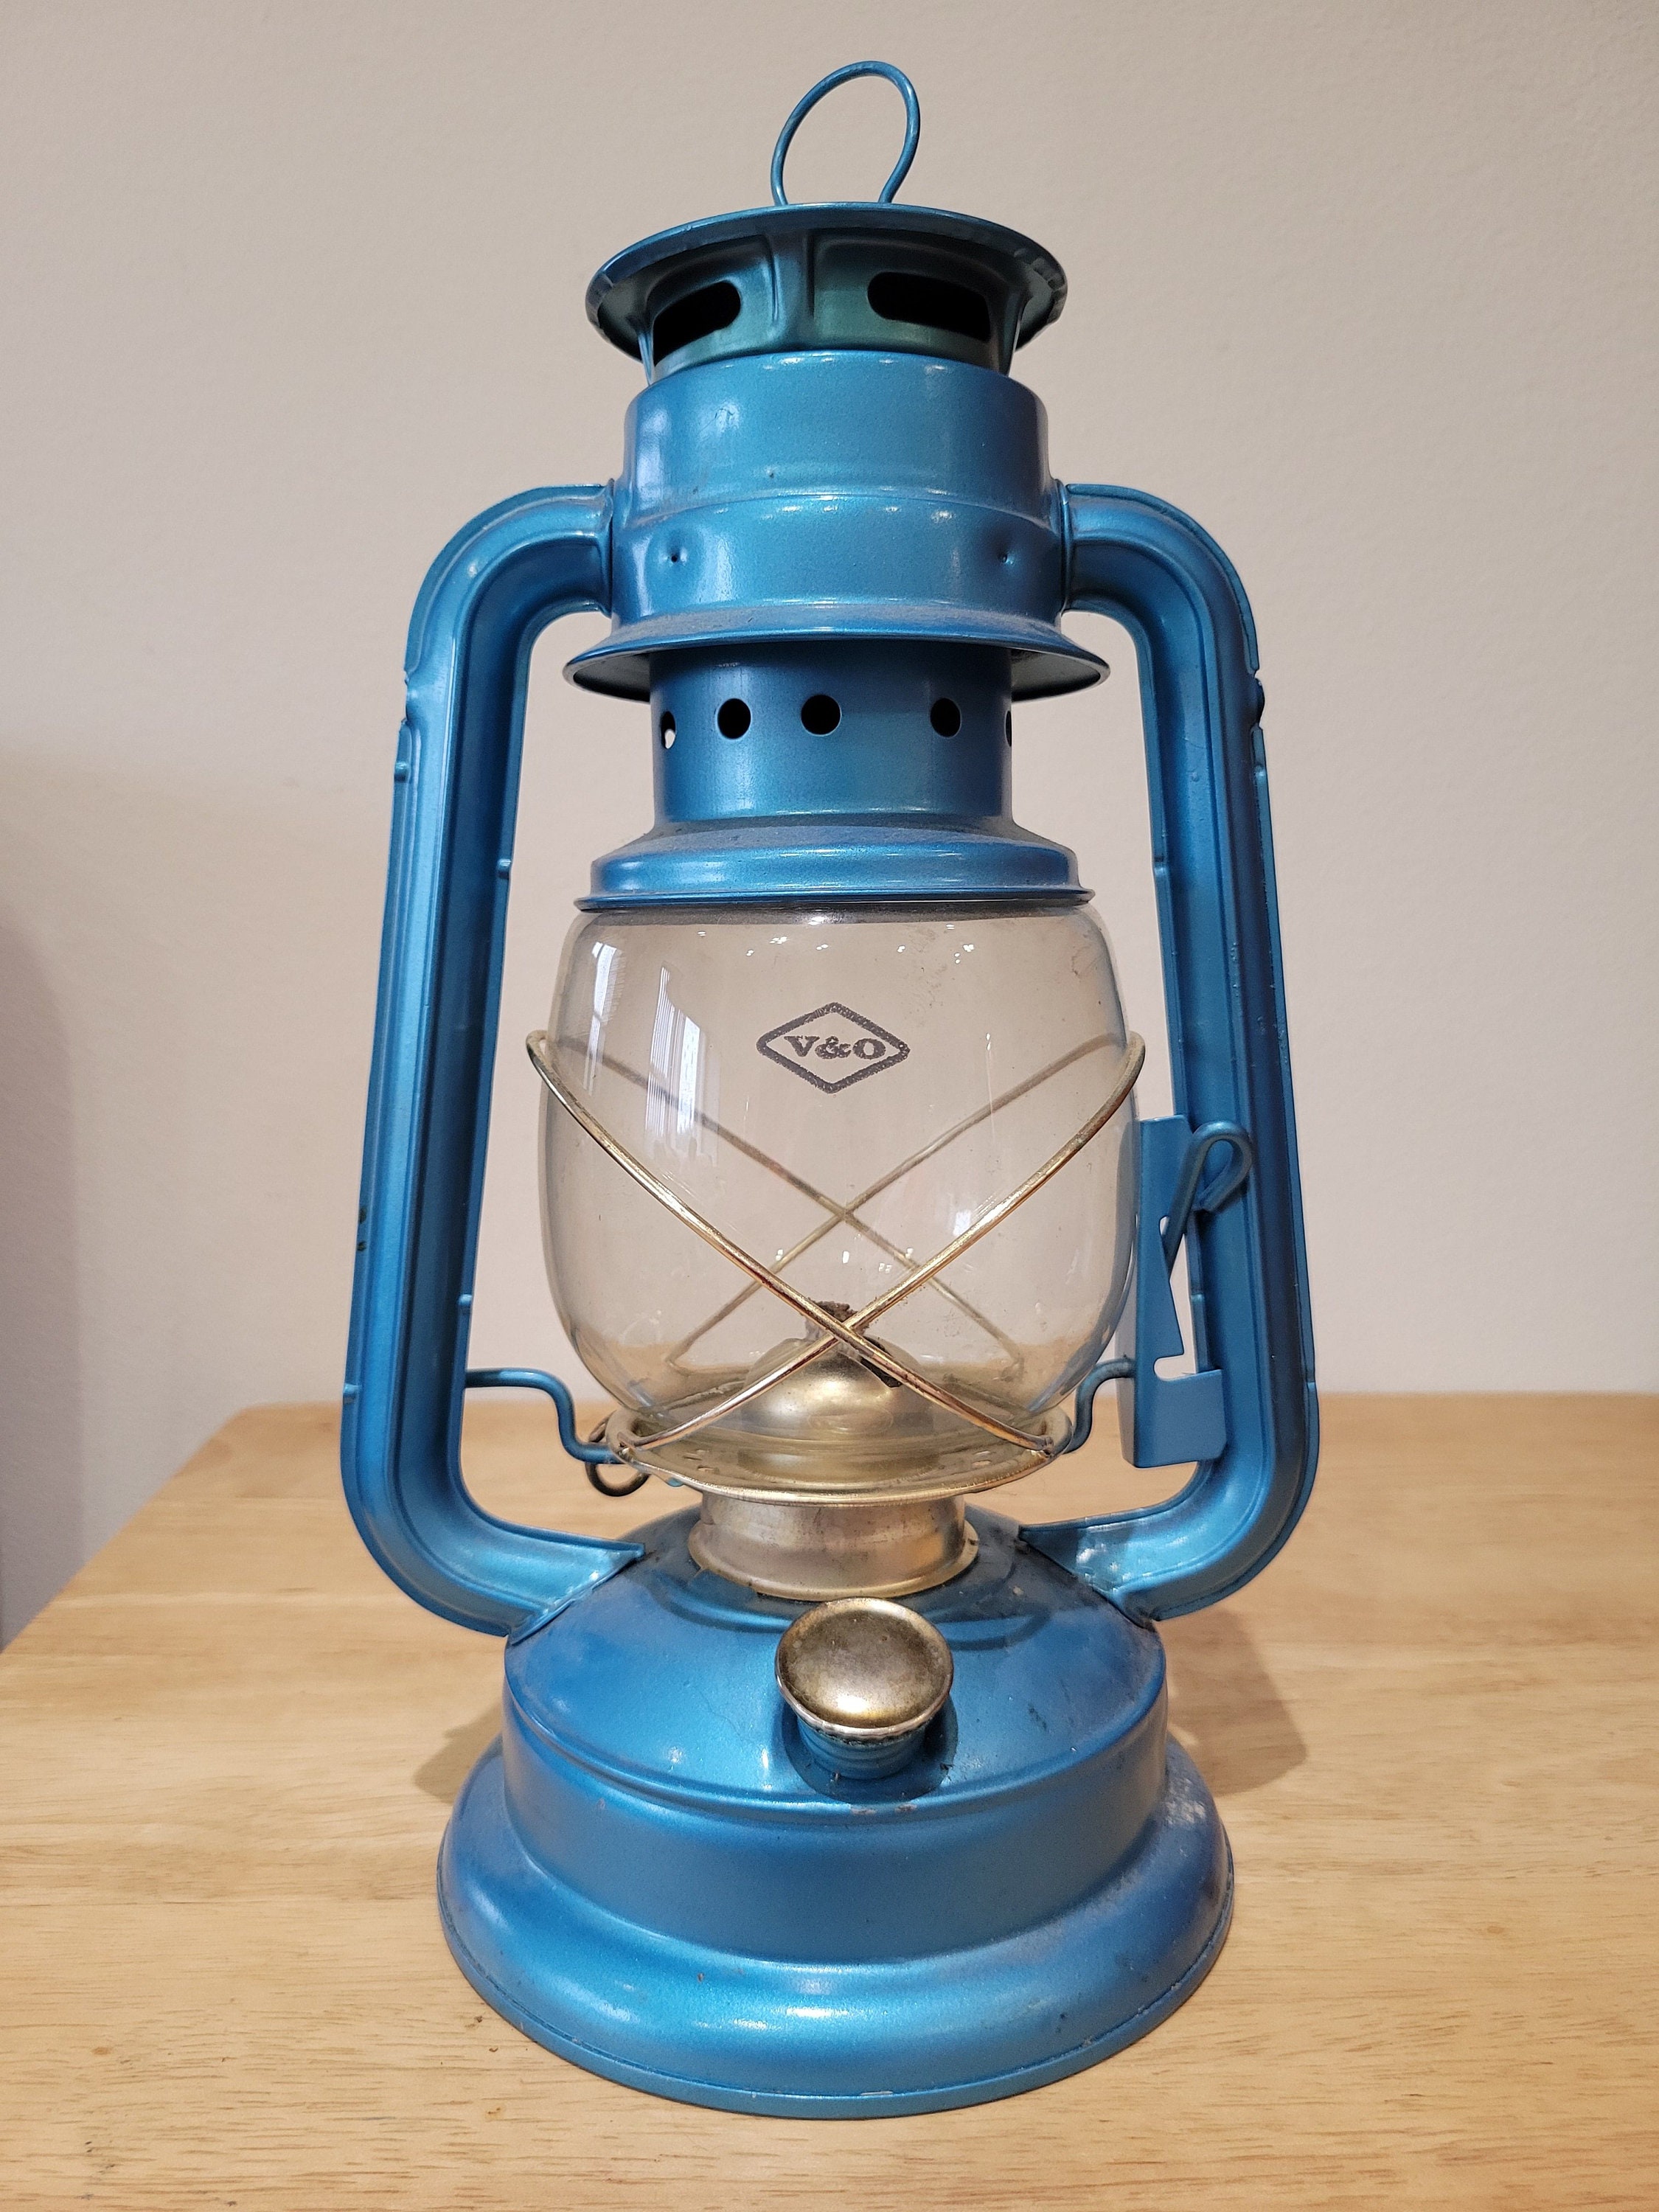 Camp lighting, classic camping style – the folding candle lantern